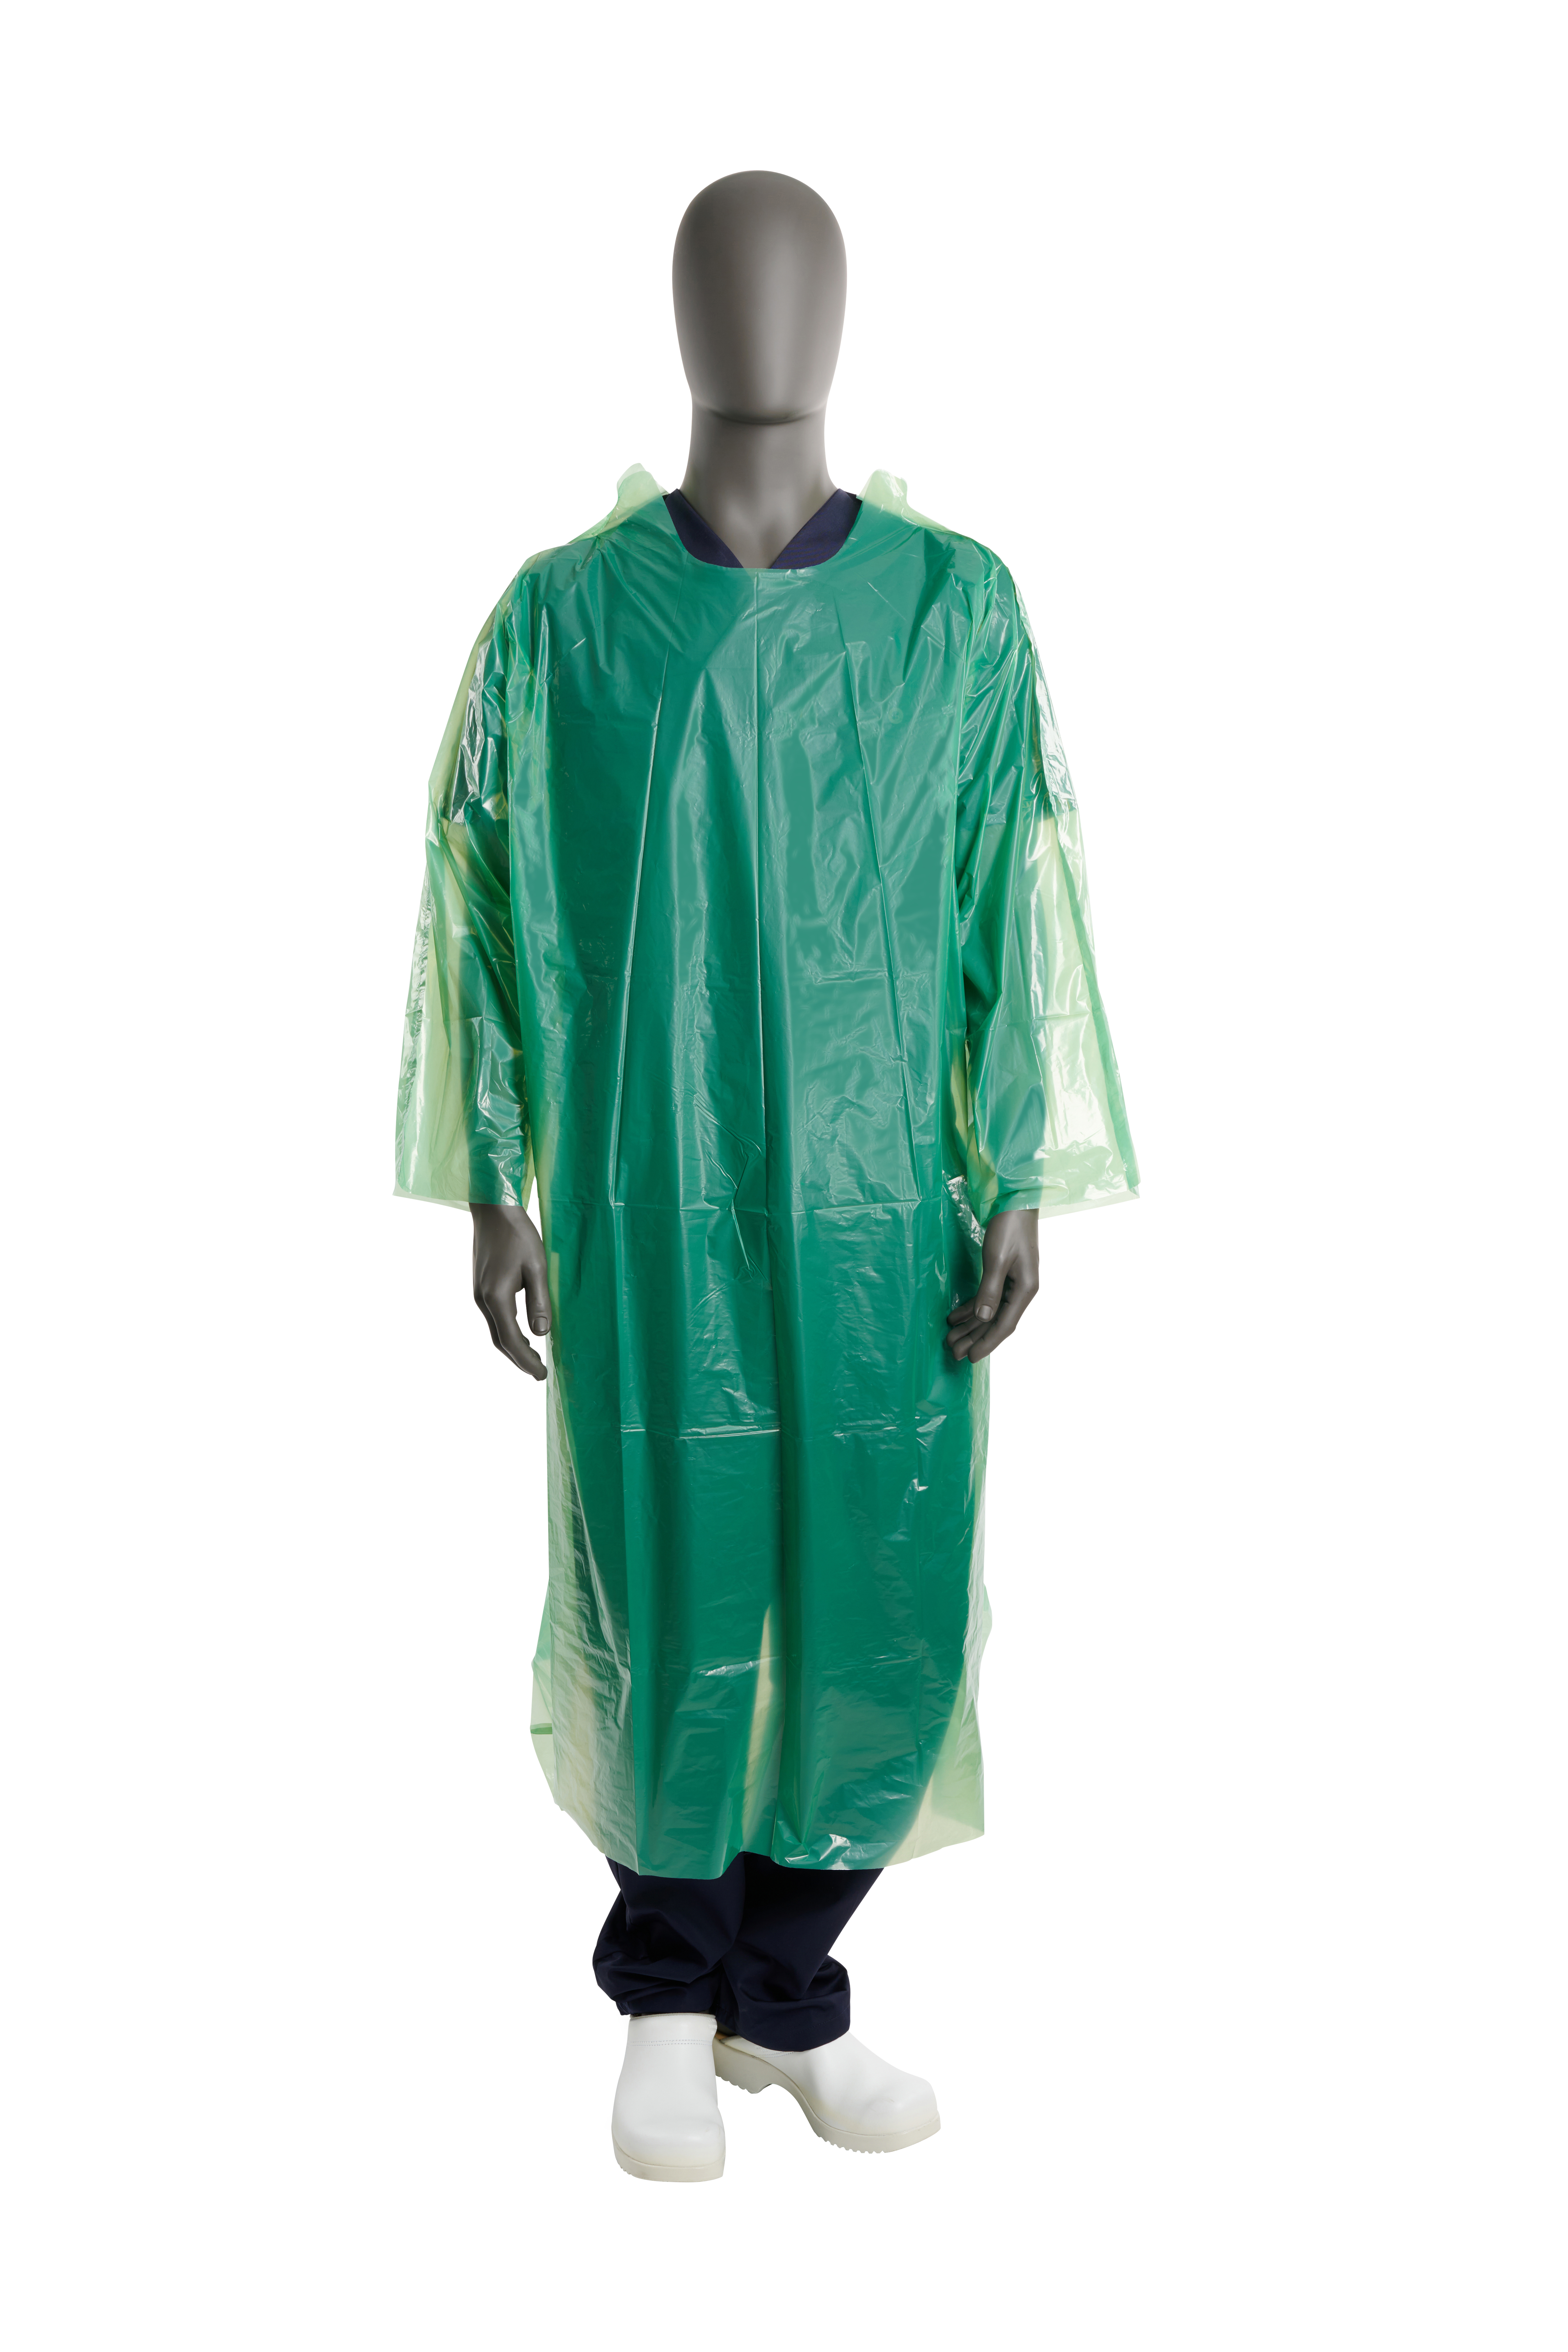 KRUTEX Disposable Gown, green, pullover, 20/pk